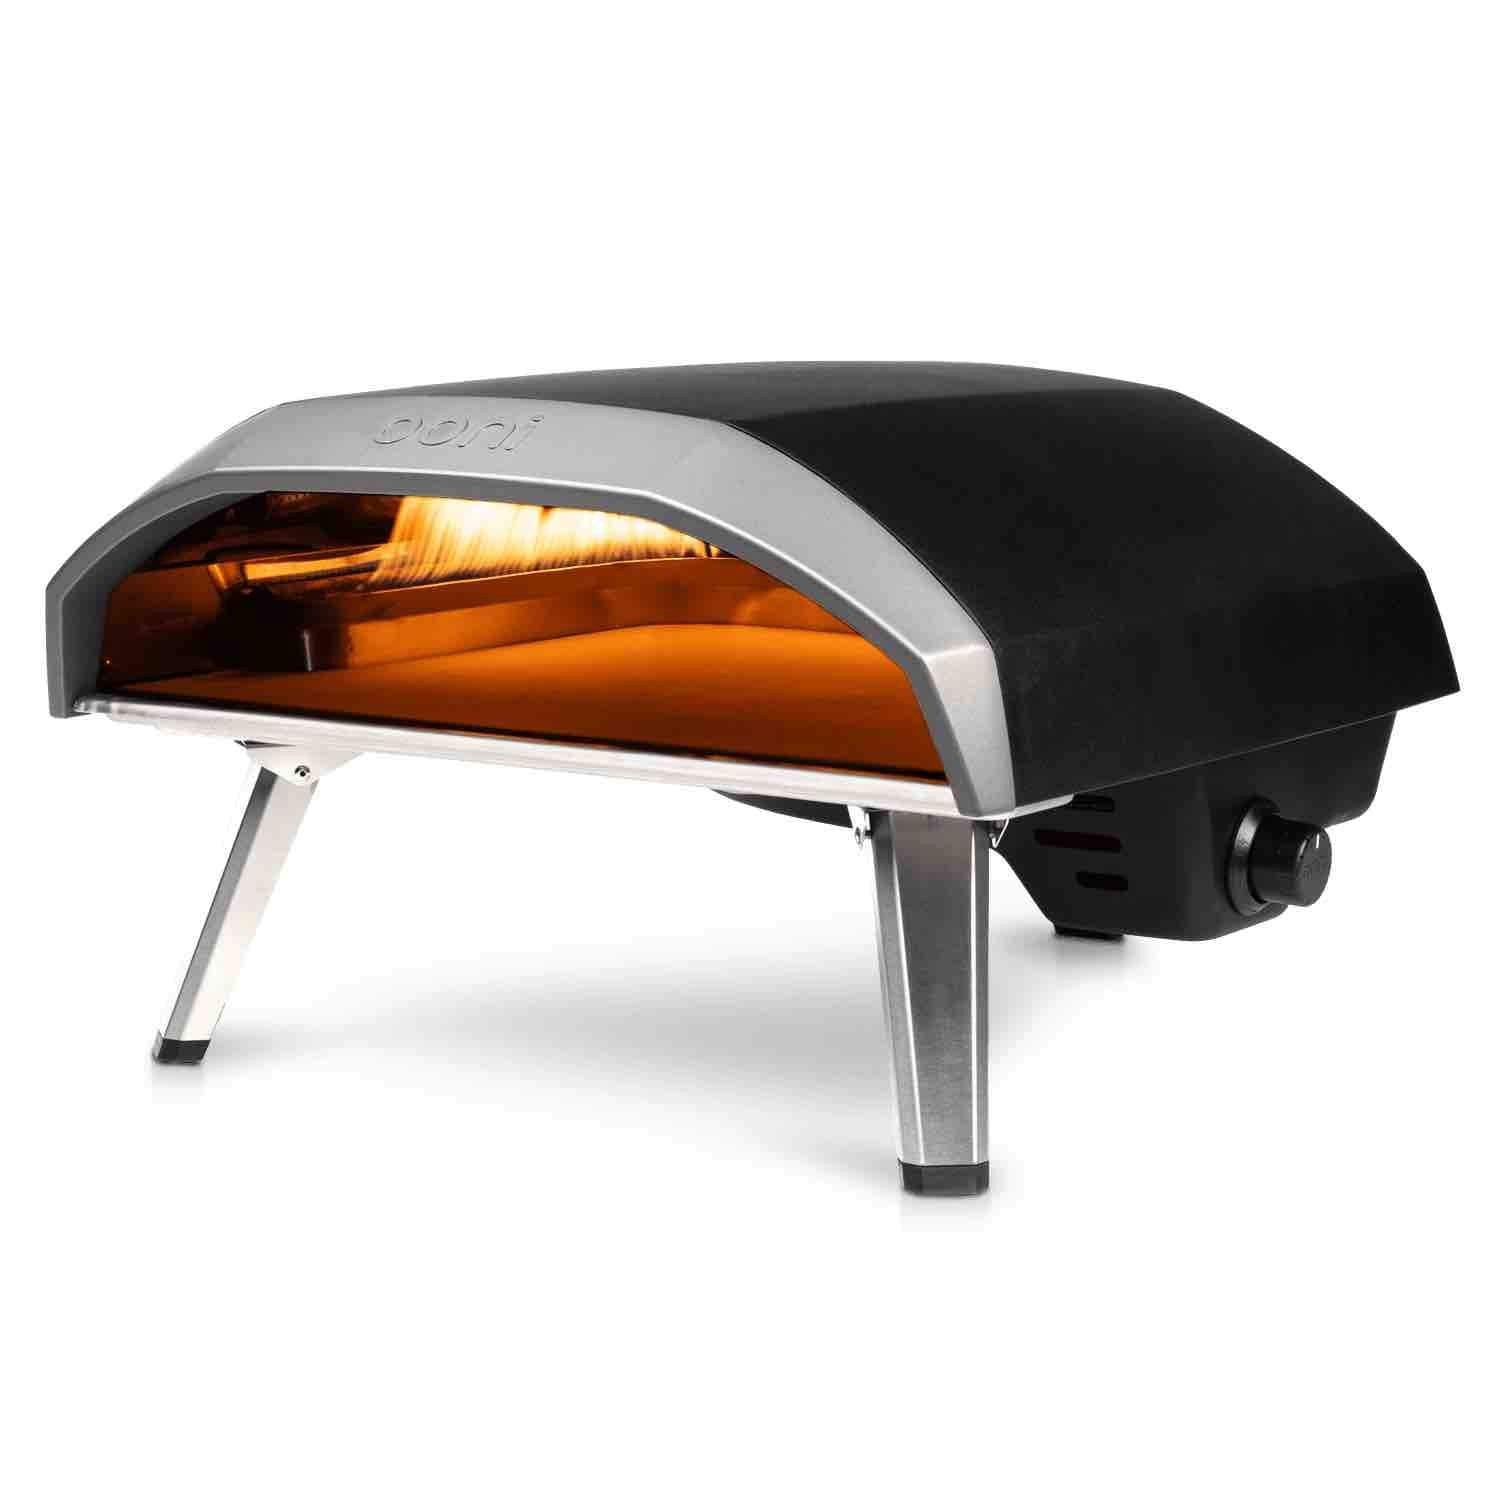 Ooni Koda 16 Portable Gas Fired Pizza Oven